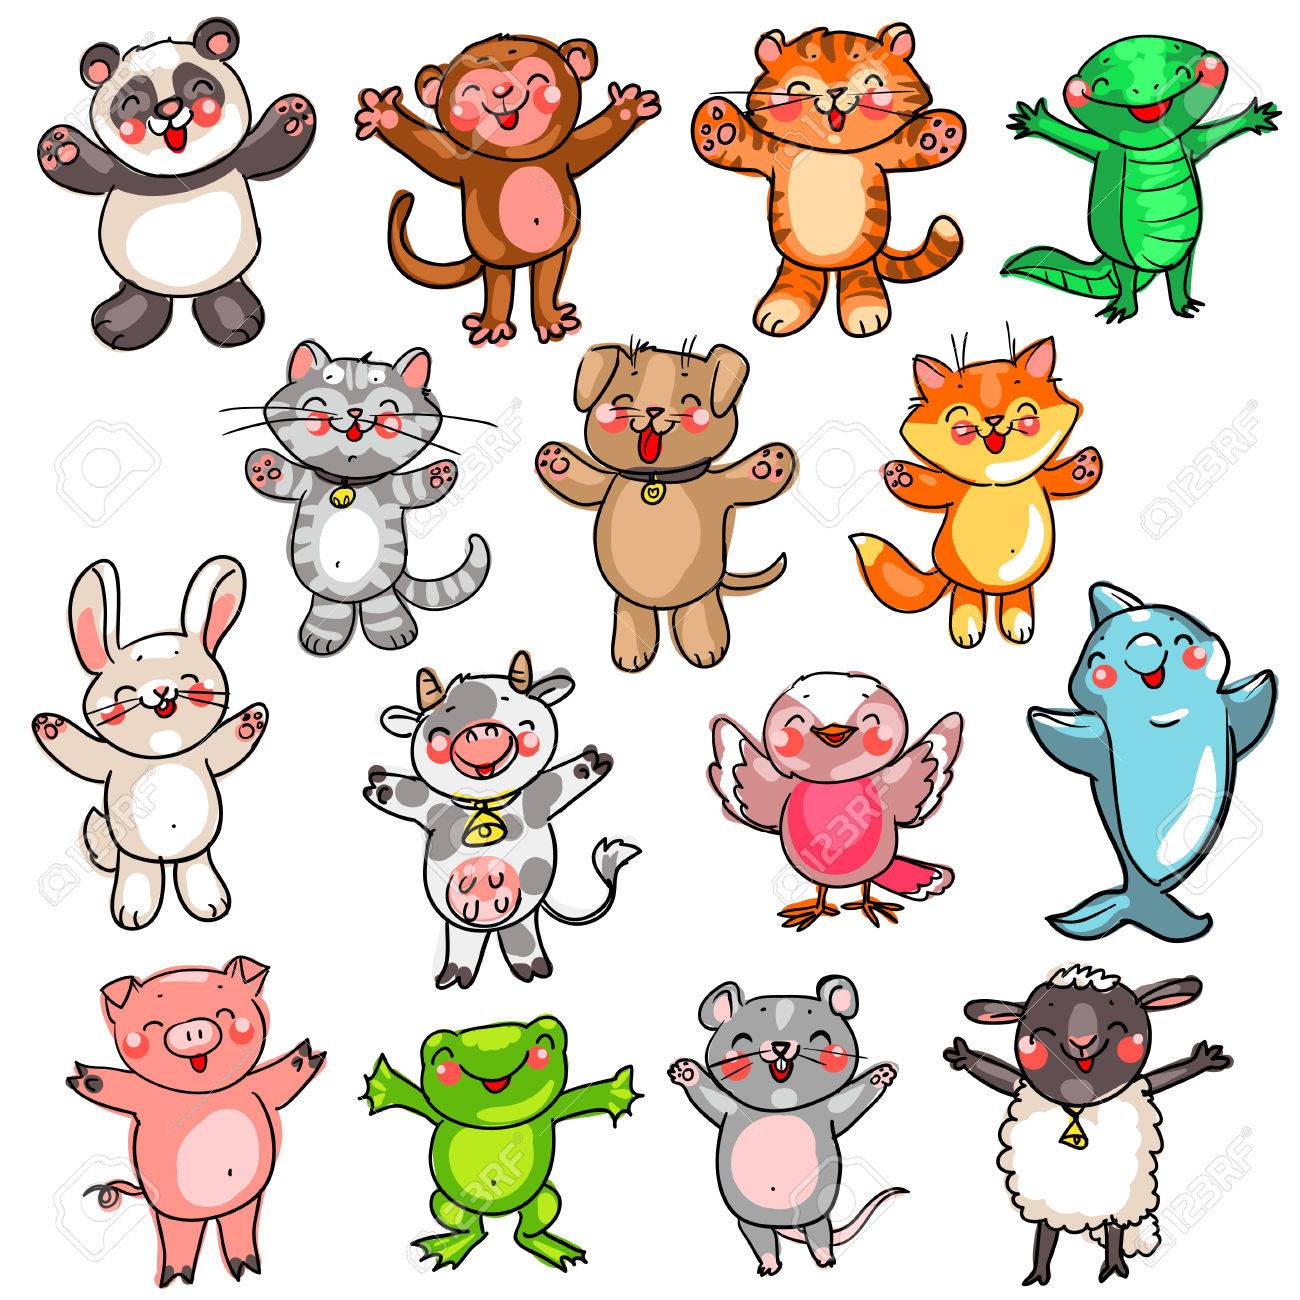 Baby Animal Cartoon Images Clipart | Free download on ClipArtMag